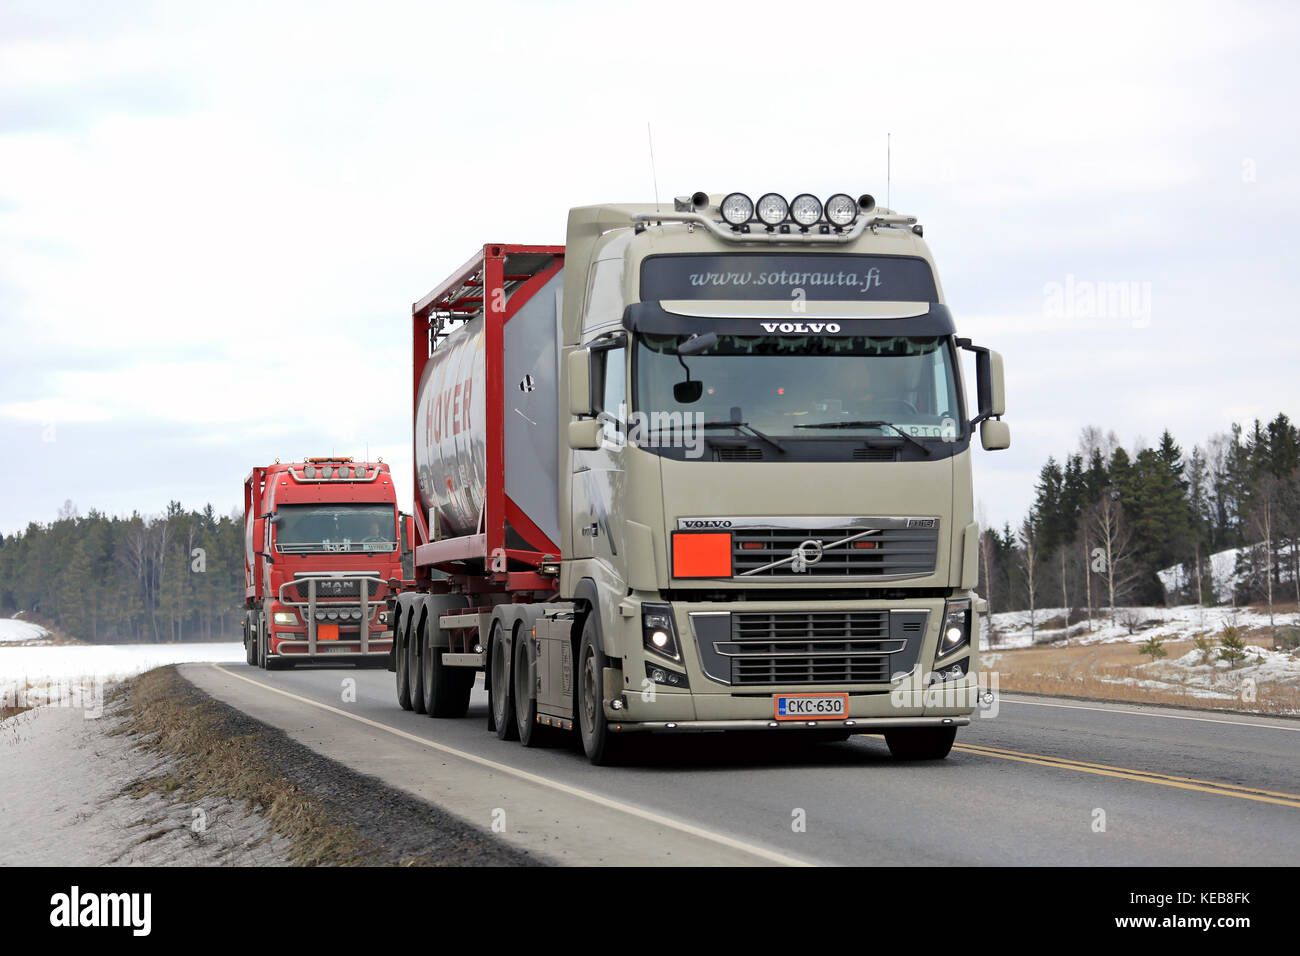 SALO, FINLAND - MARCH 4, 2016: Two semi tank trucks on the road in south of Finland. Stock Photo